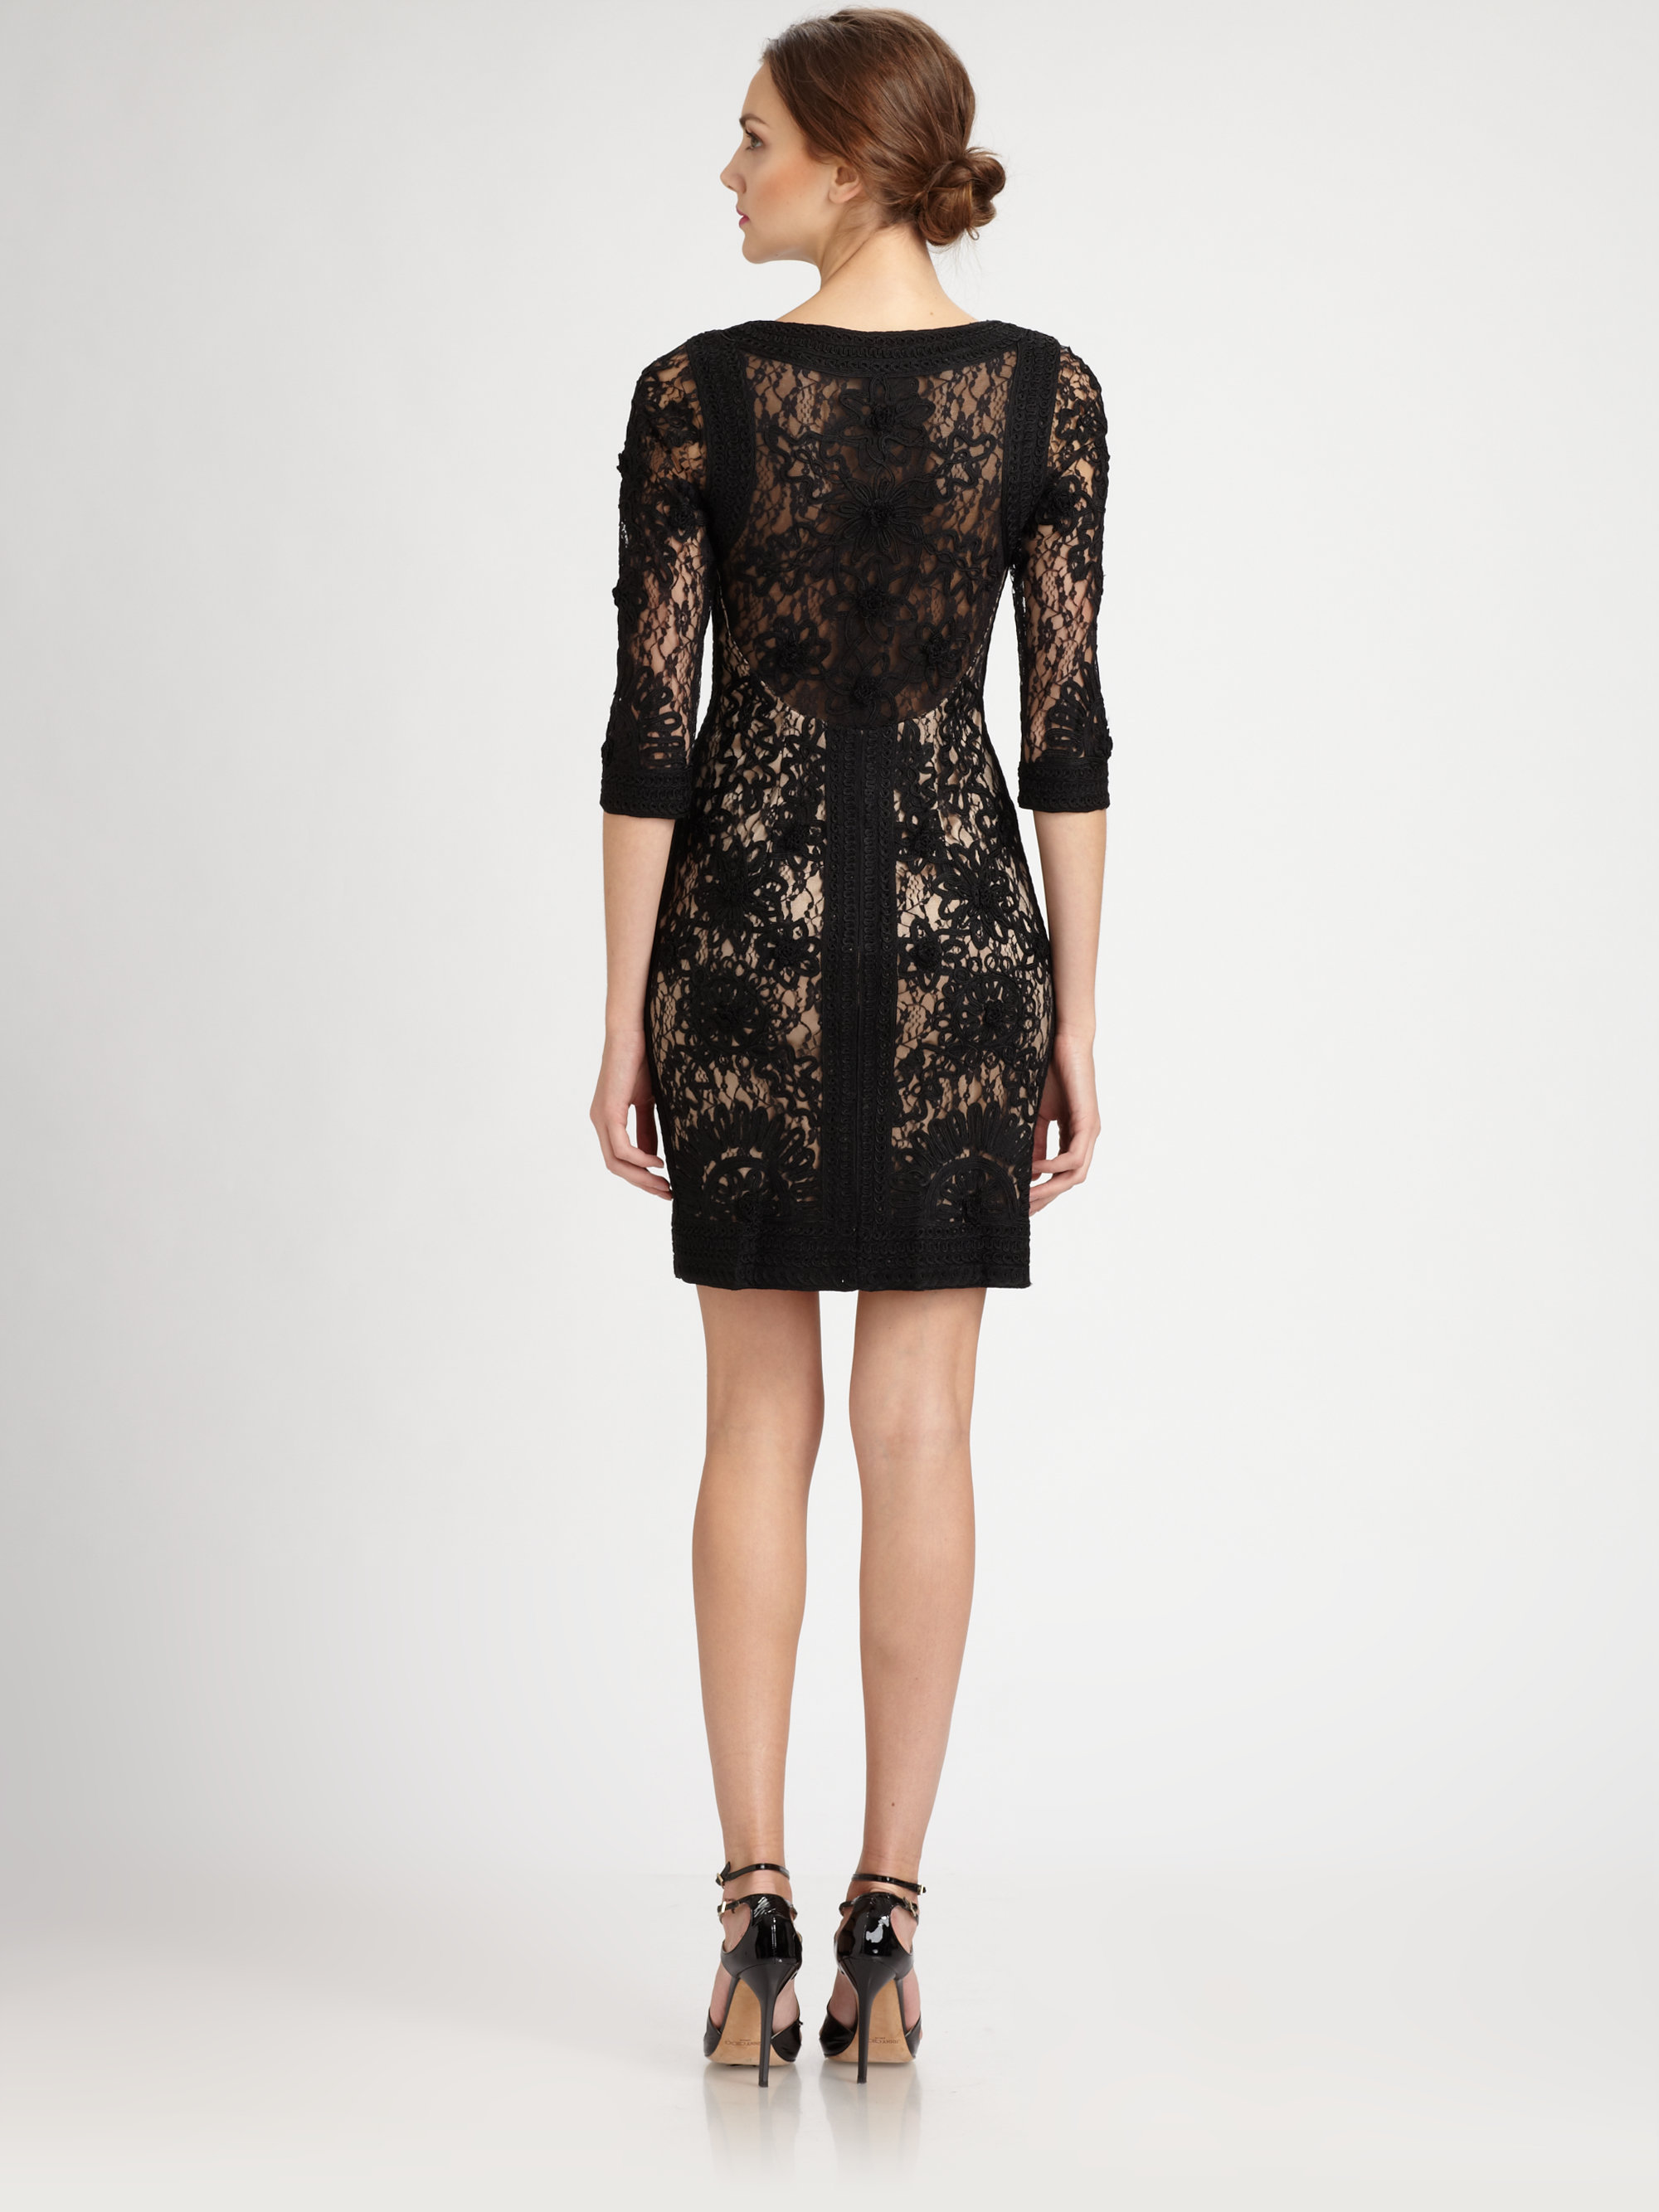 Sue wong Embroidered Lace Dress in Black | Lyst